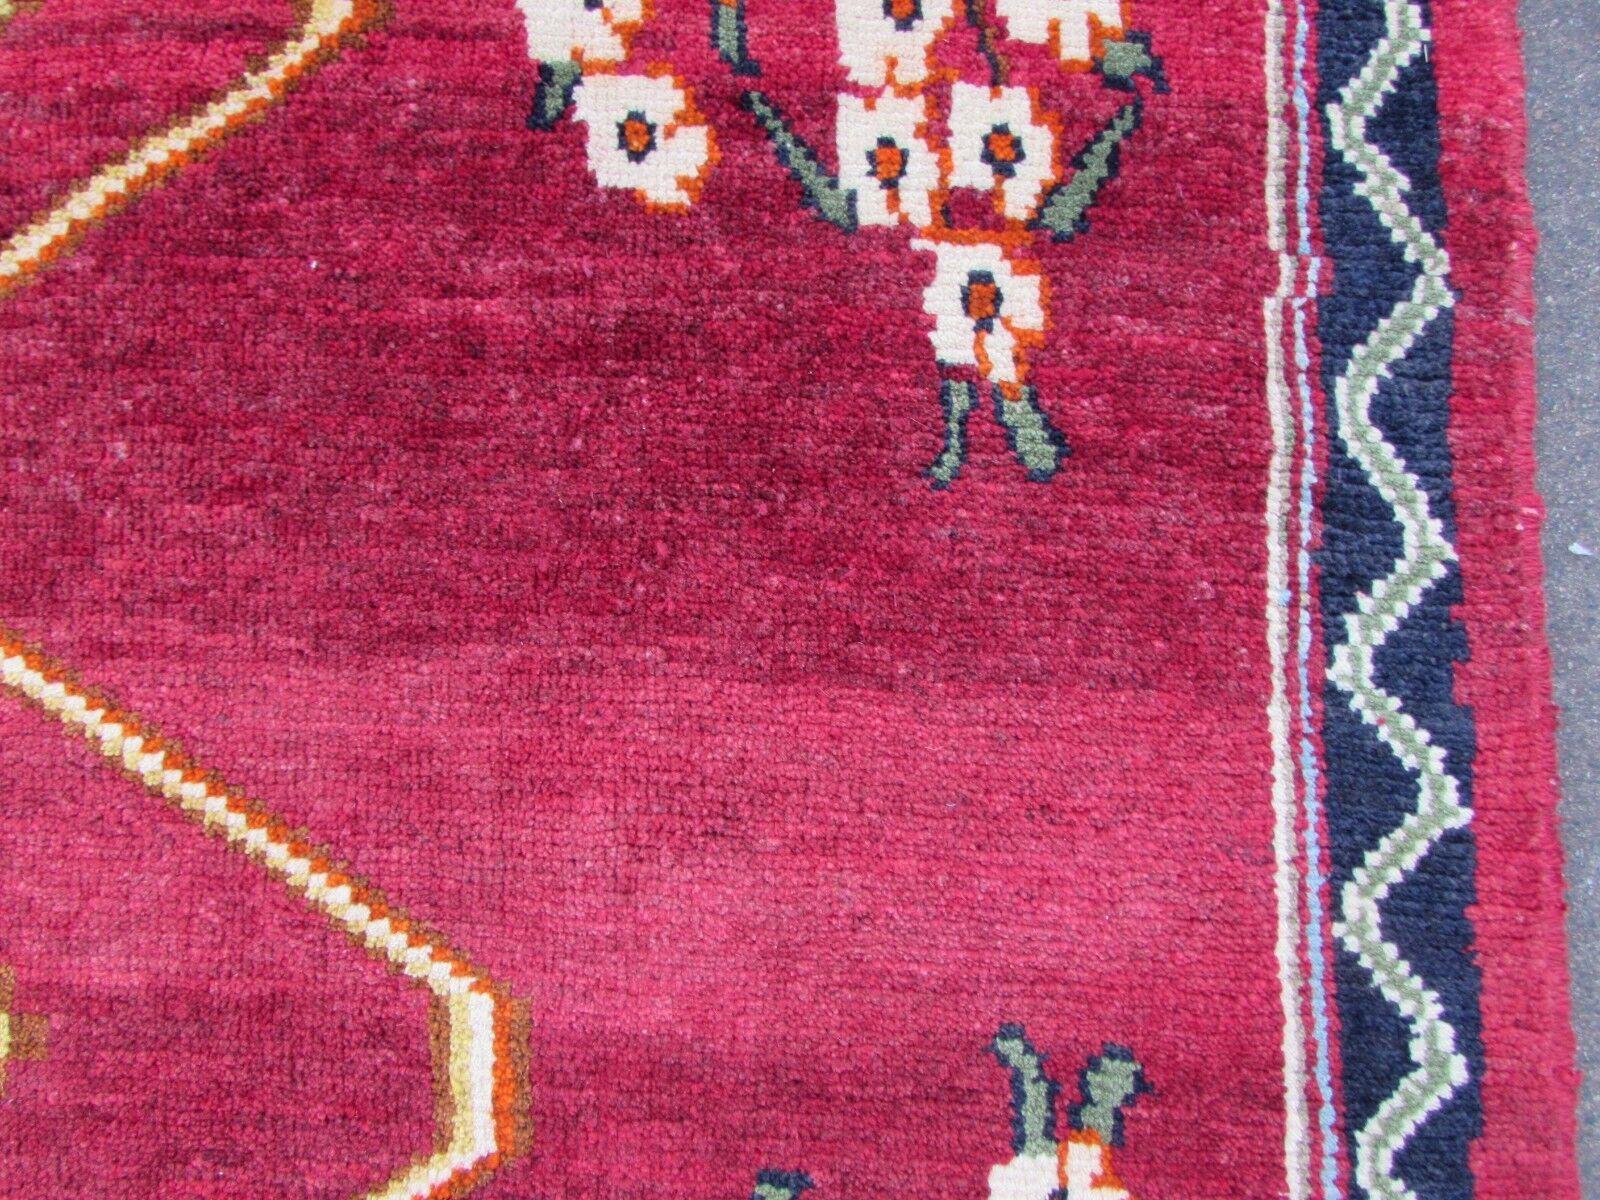 Handmade Vintage Persian Style Gabbeh Red Rug 4.1' x 5.3', 1970s, 1Q60 For Sale 1